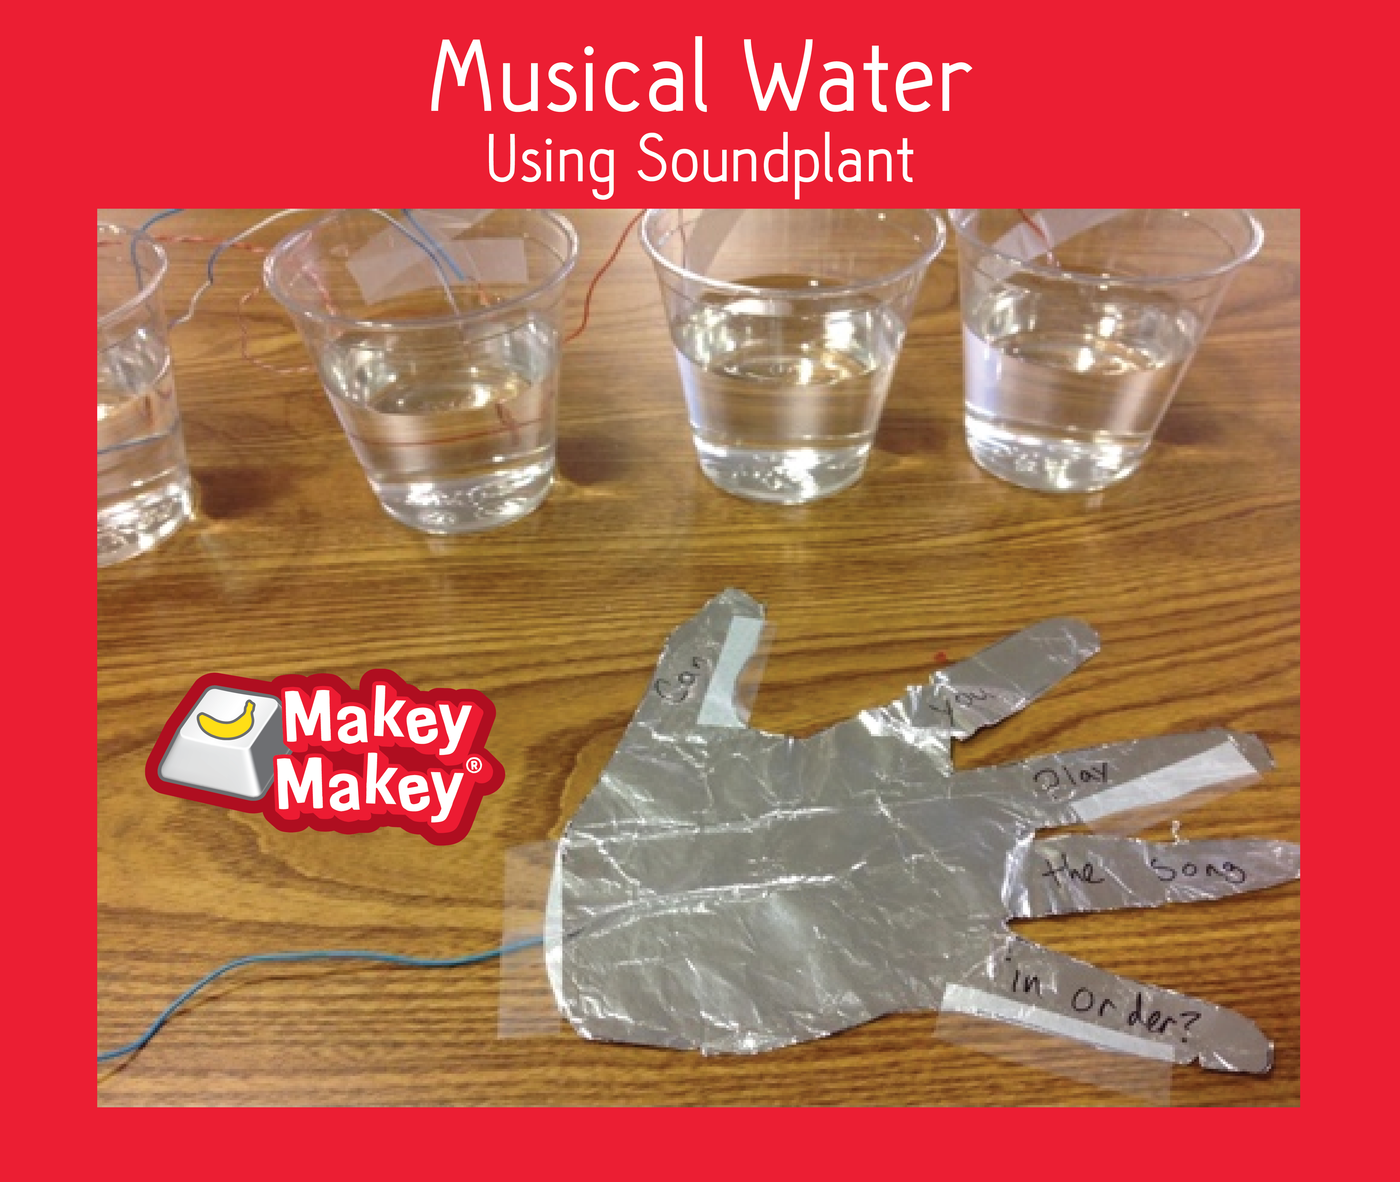 Musical Water with Soundplant